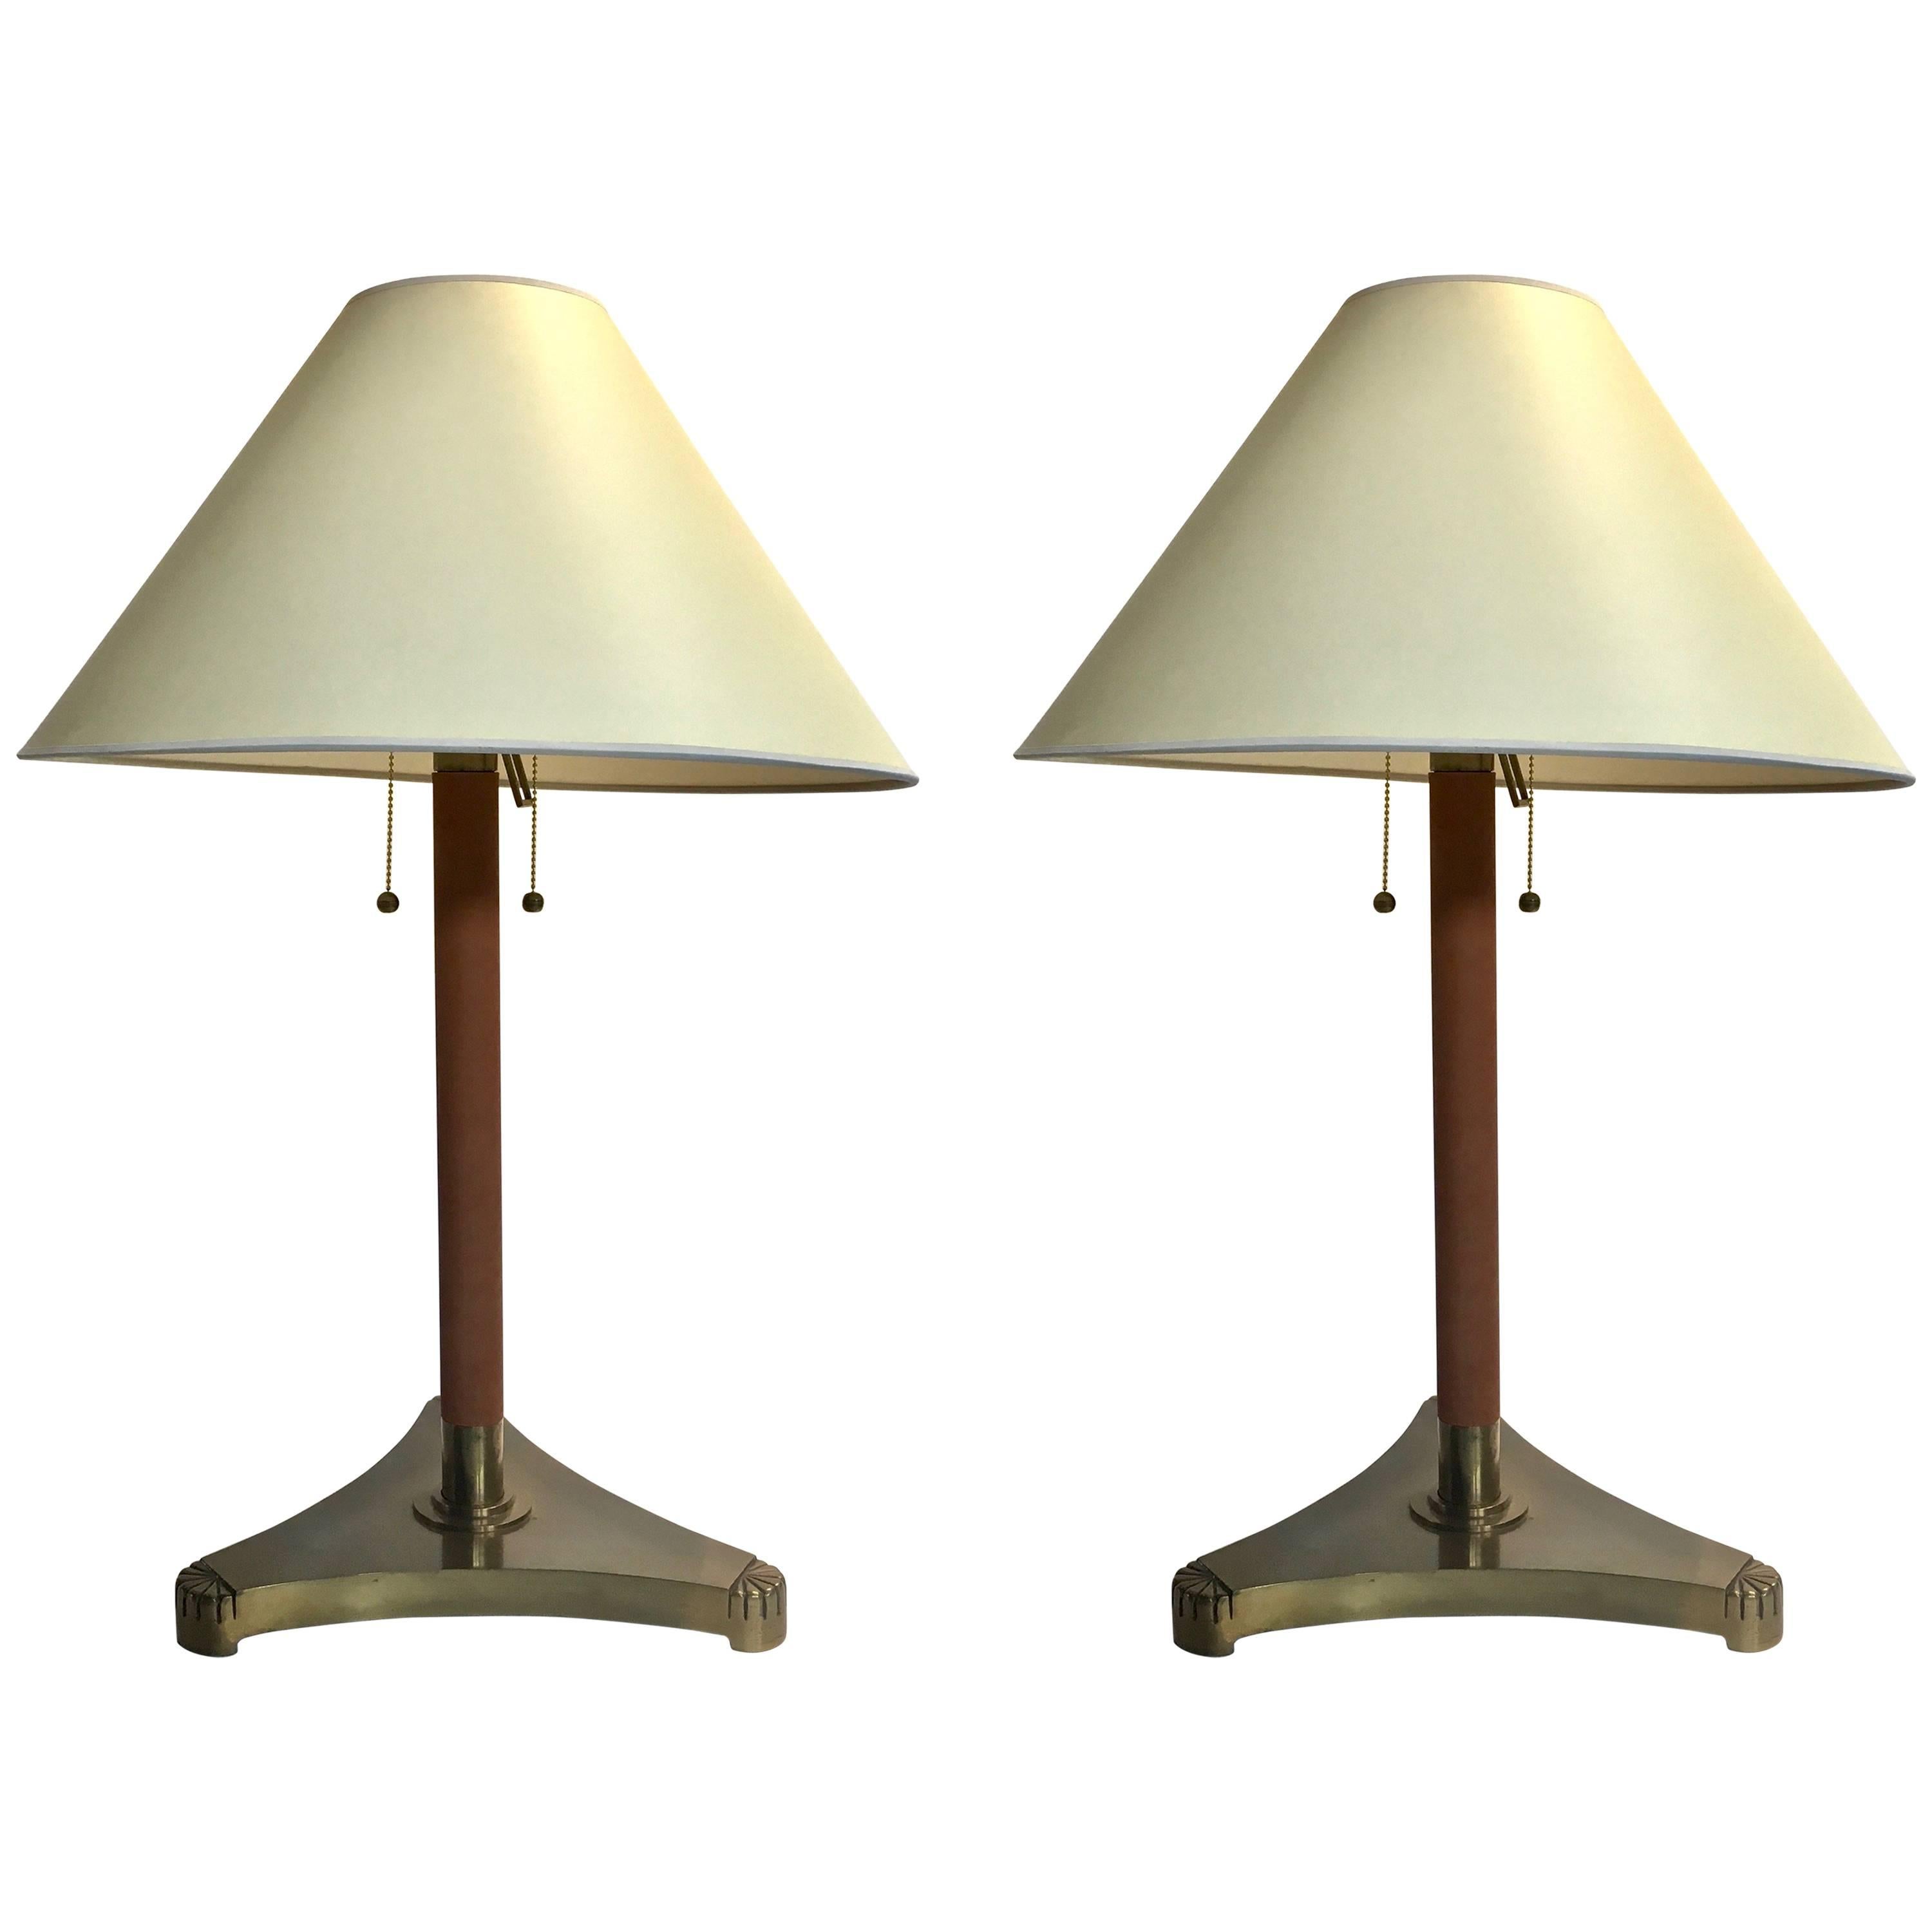 Pair of Brass and Leather Wrapped Extendable Table Lamps, Manner of Adnet